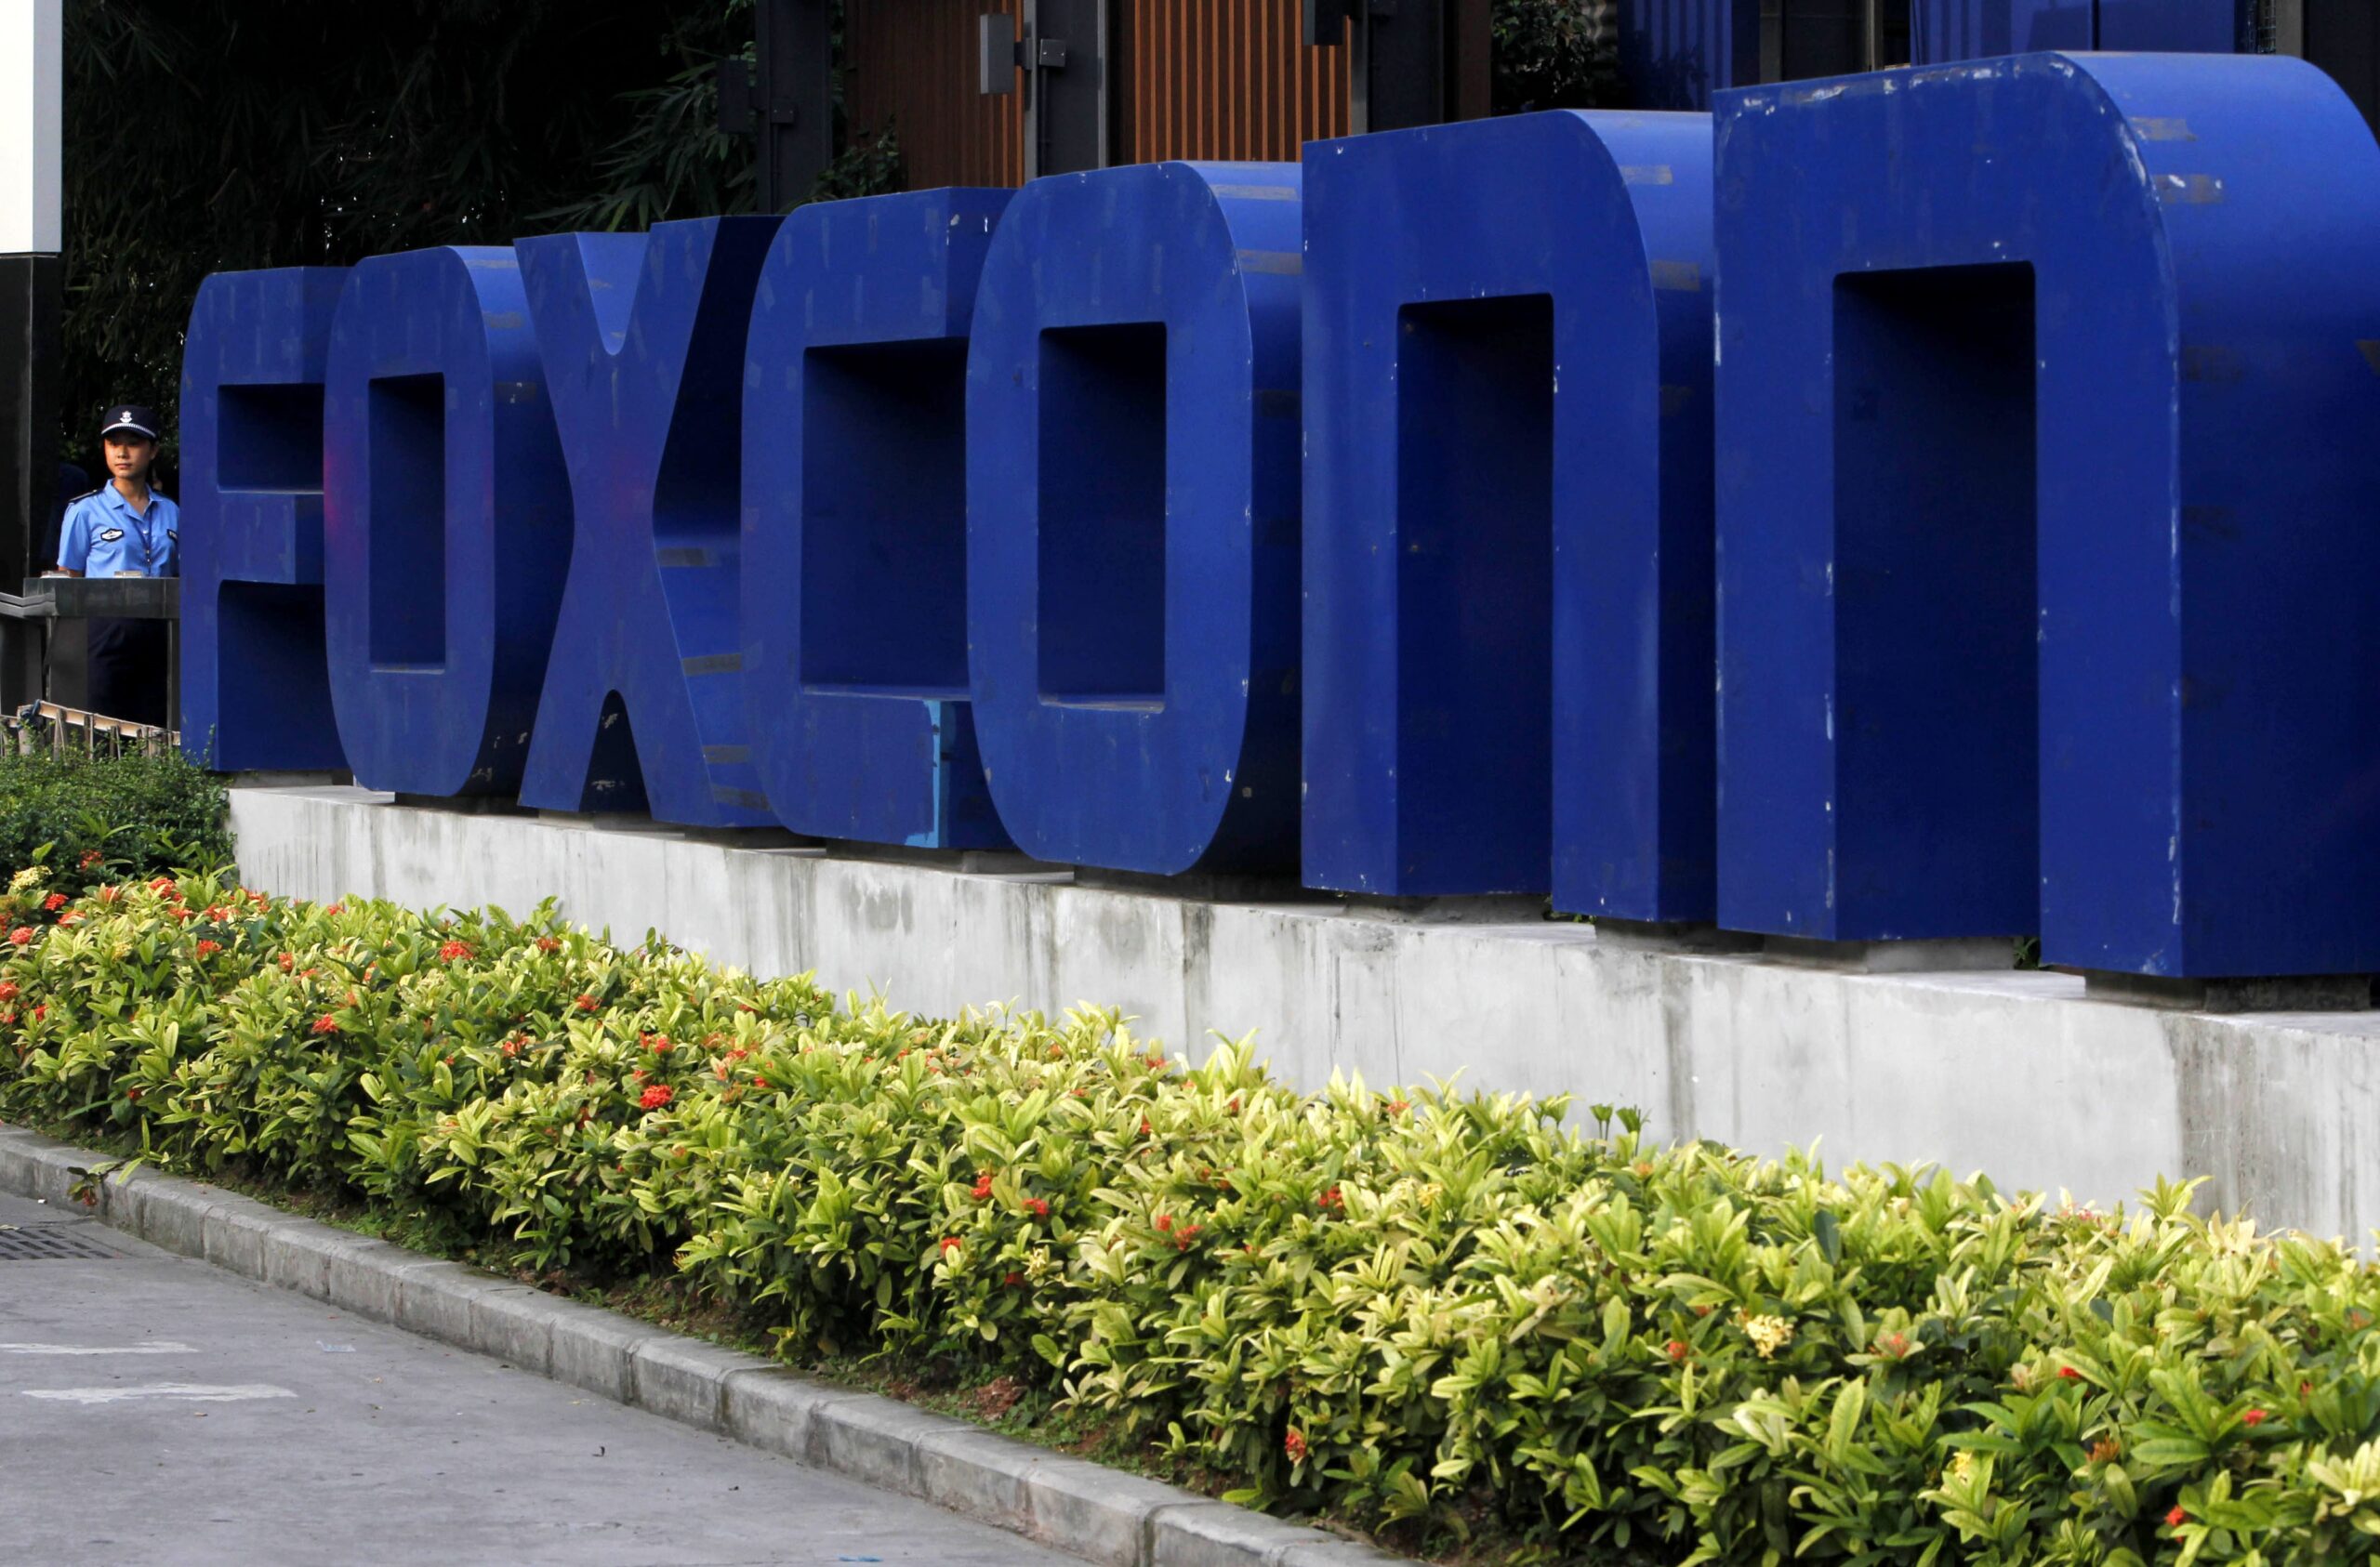 GOP Lawmakers Defend Foxconn Amid Mixed Signals About Job Creation